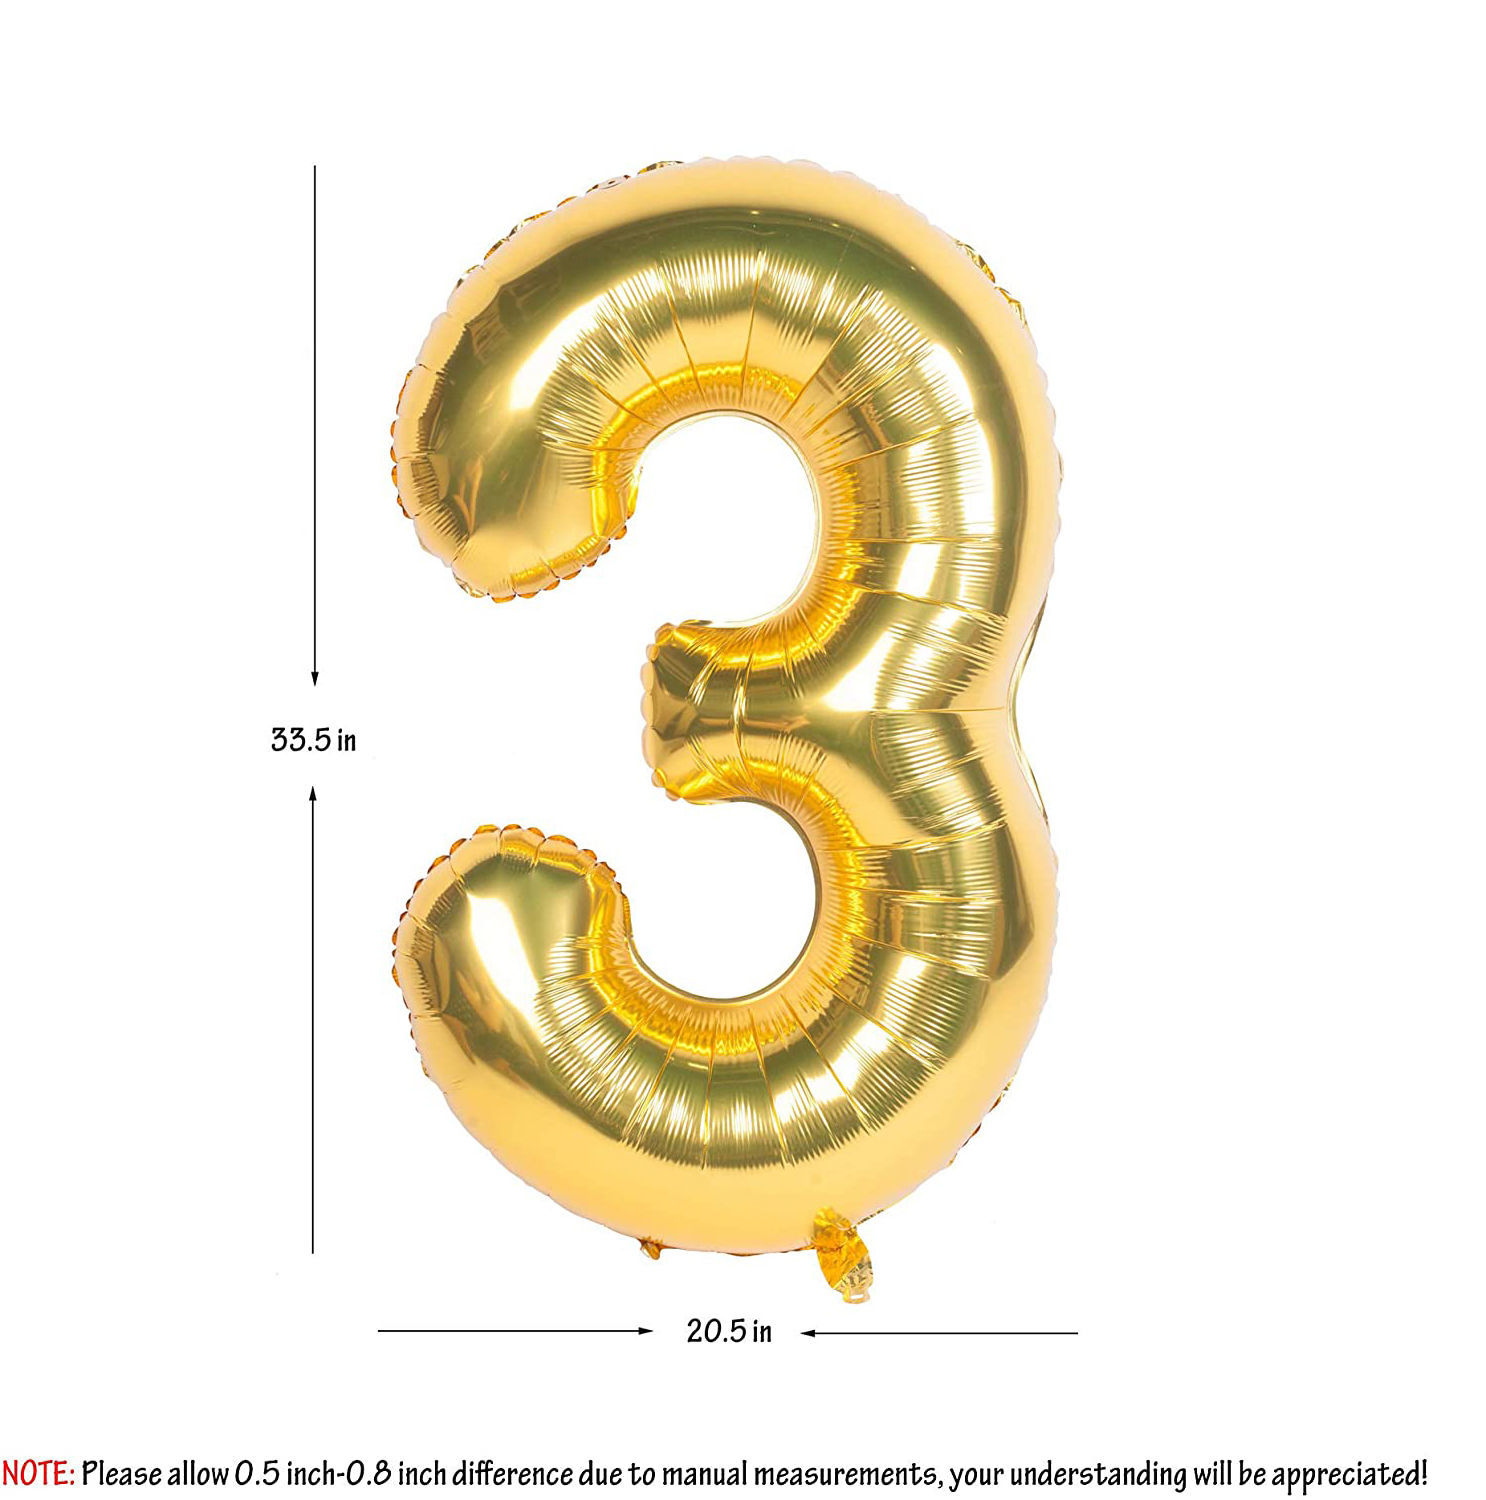 Picture of 34'' Foil Balloon Number 3 - Gold (helium-filled)